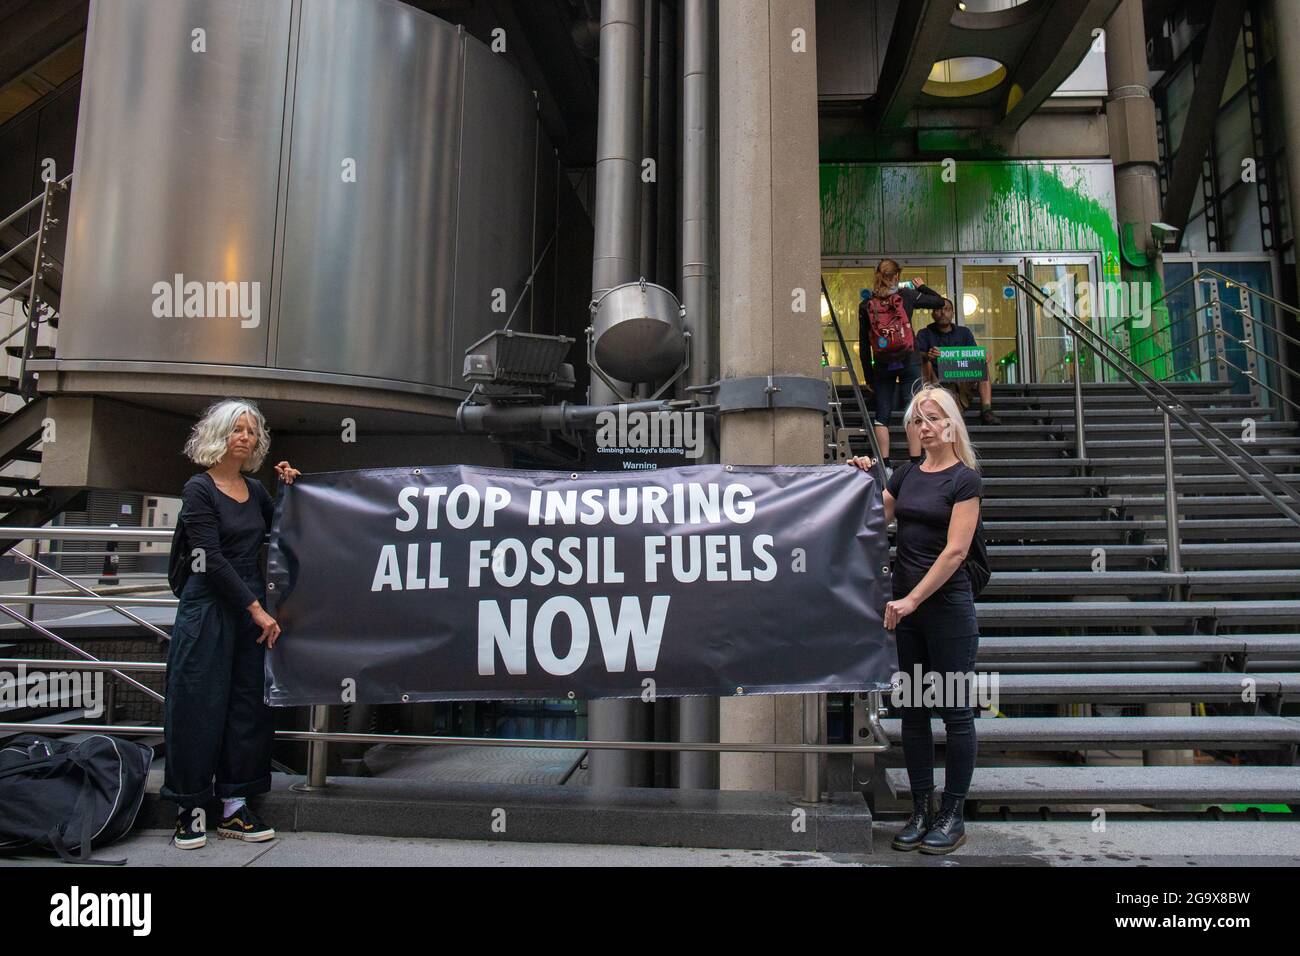 London, England, UK  28th July 2021 Insurance Rebellion throw green paint over Lloyds of London to highlight their greenwashing campaign. One activist was arrested after throwing biodegradable, water based, green paint over the front of the building. The protestor, after having thrown the paint sat down and awaited the arrival of police. A spokesperson said 'Lloyds is simply pretending to take positive climate action while it still enables swathes of the fossil fuel industry'. Stock Photo